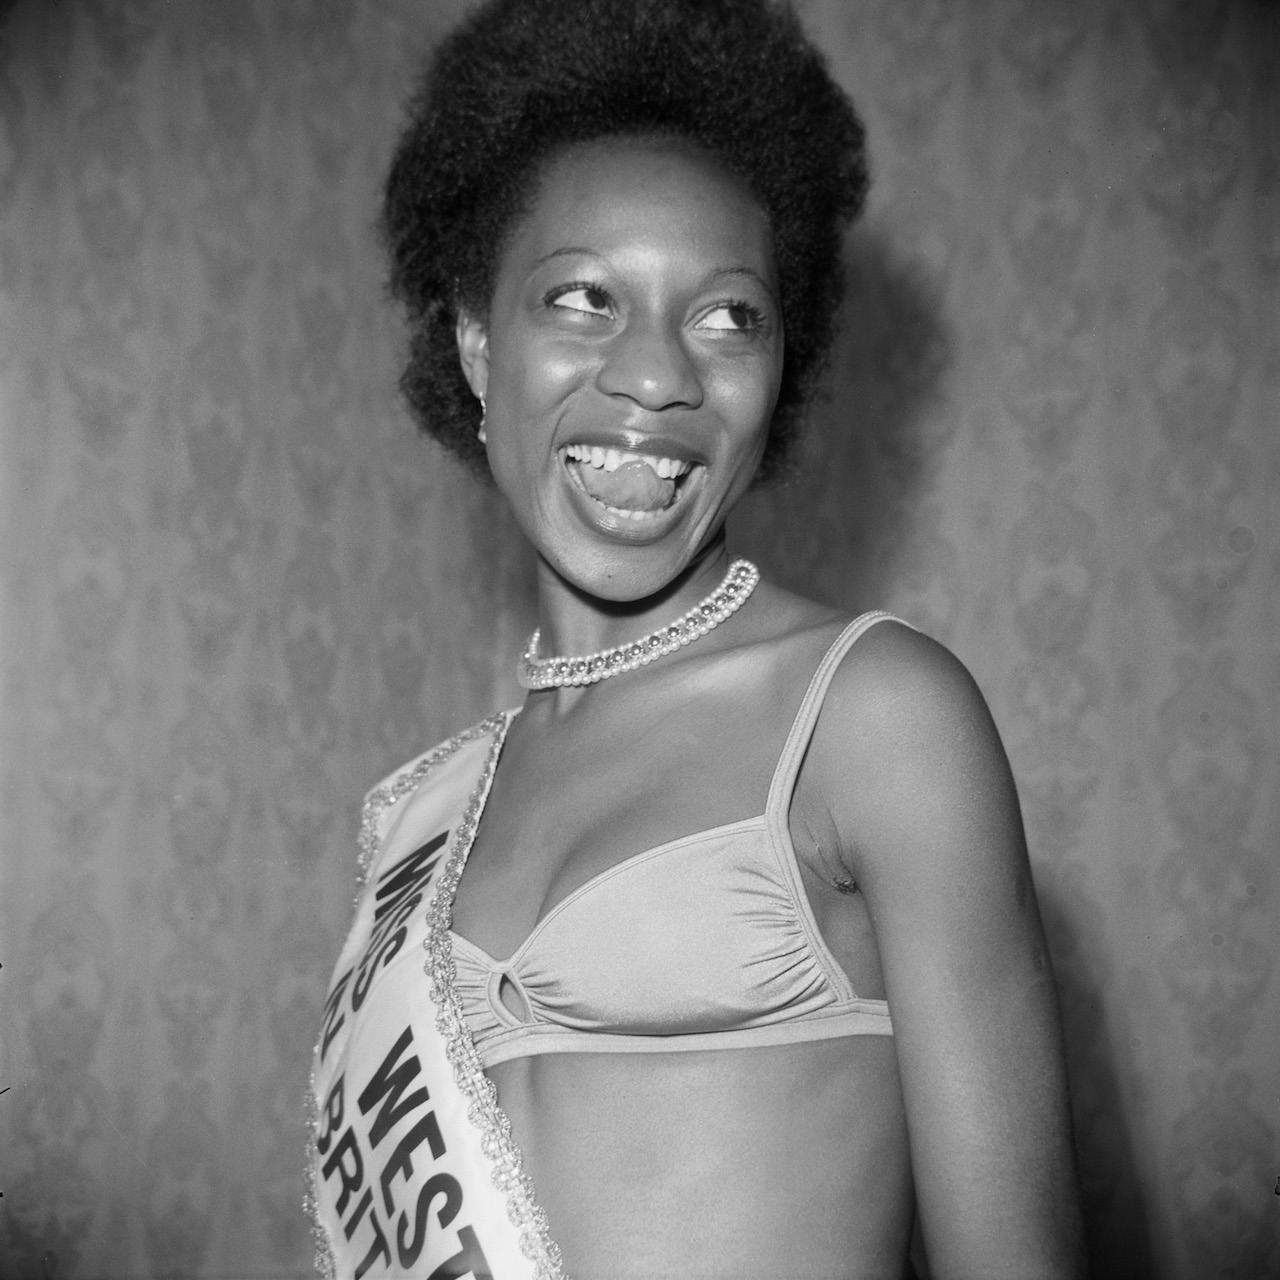 A Duality of Identity: Capturing Caribbean Womanhood Image, Ideals, and Influence through Black Beauty, 1960–1970s